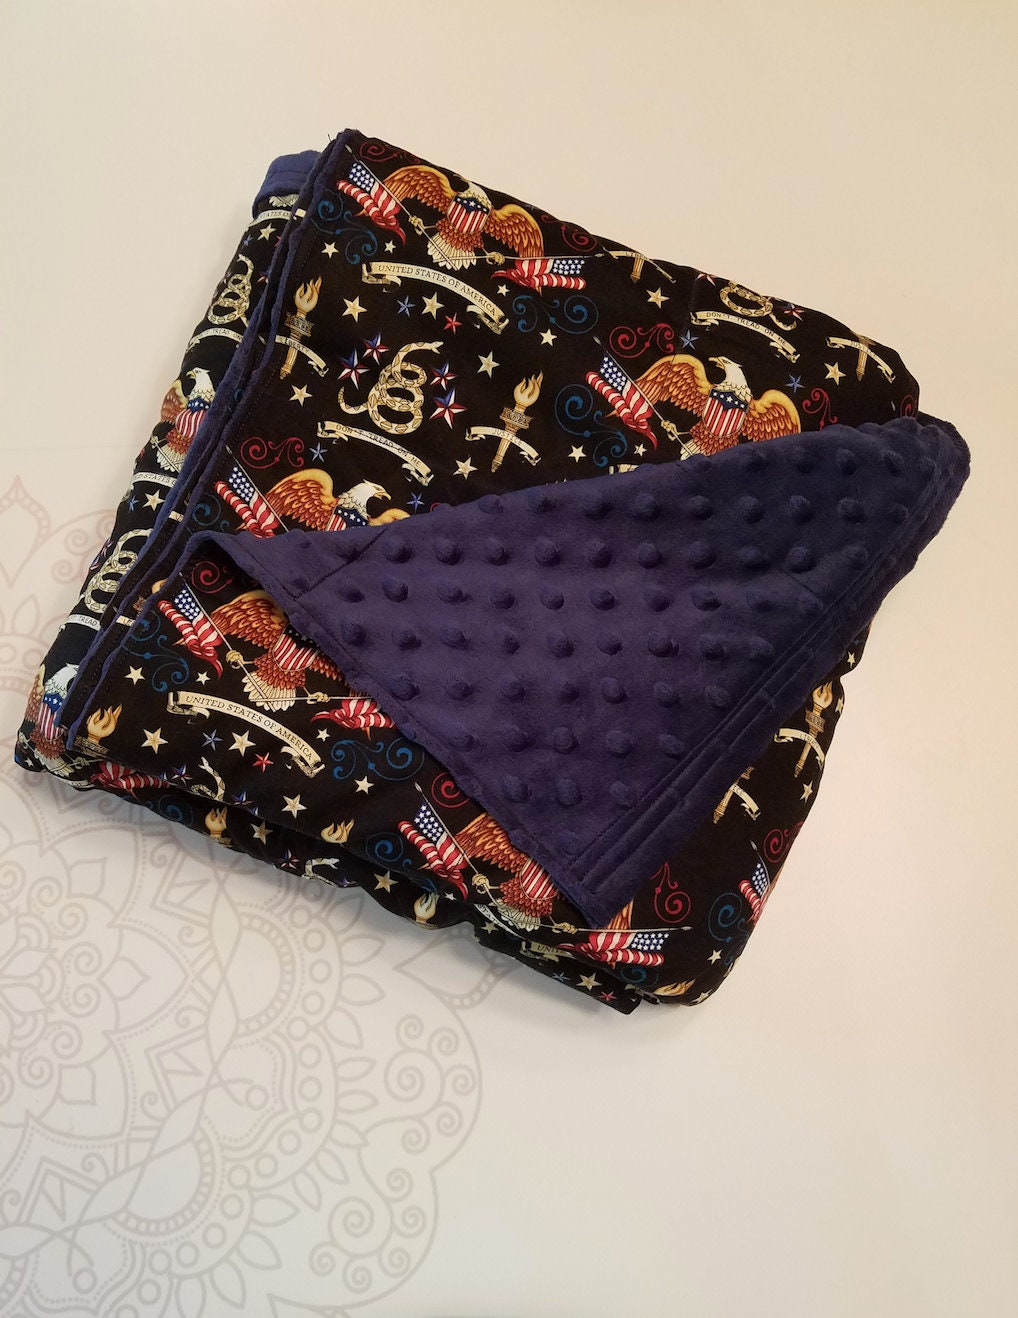 READY to SHIP, Weighted Blanket, 40x60-15 Pounds, Eagle Woven Cotton